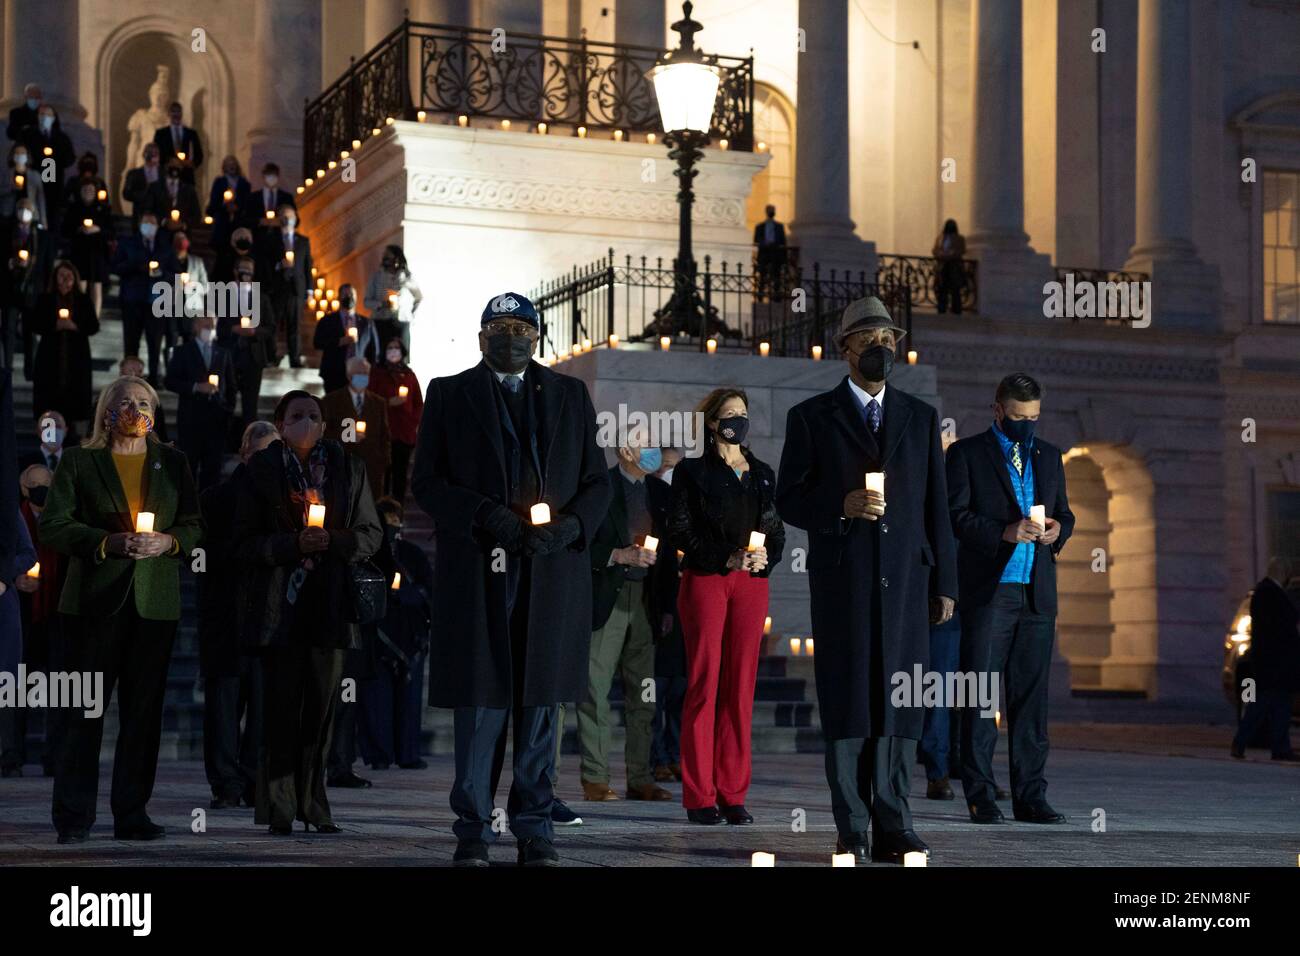 Rep. Jim Clyburn, center, joins members of Congress during a candlelight vigil and moment of silence for the over 500,000 Americans who have died from COVID-19 outside the U.S. Capitol February 23, 2021 in Washington, D.C. Stock Photo